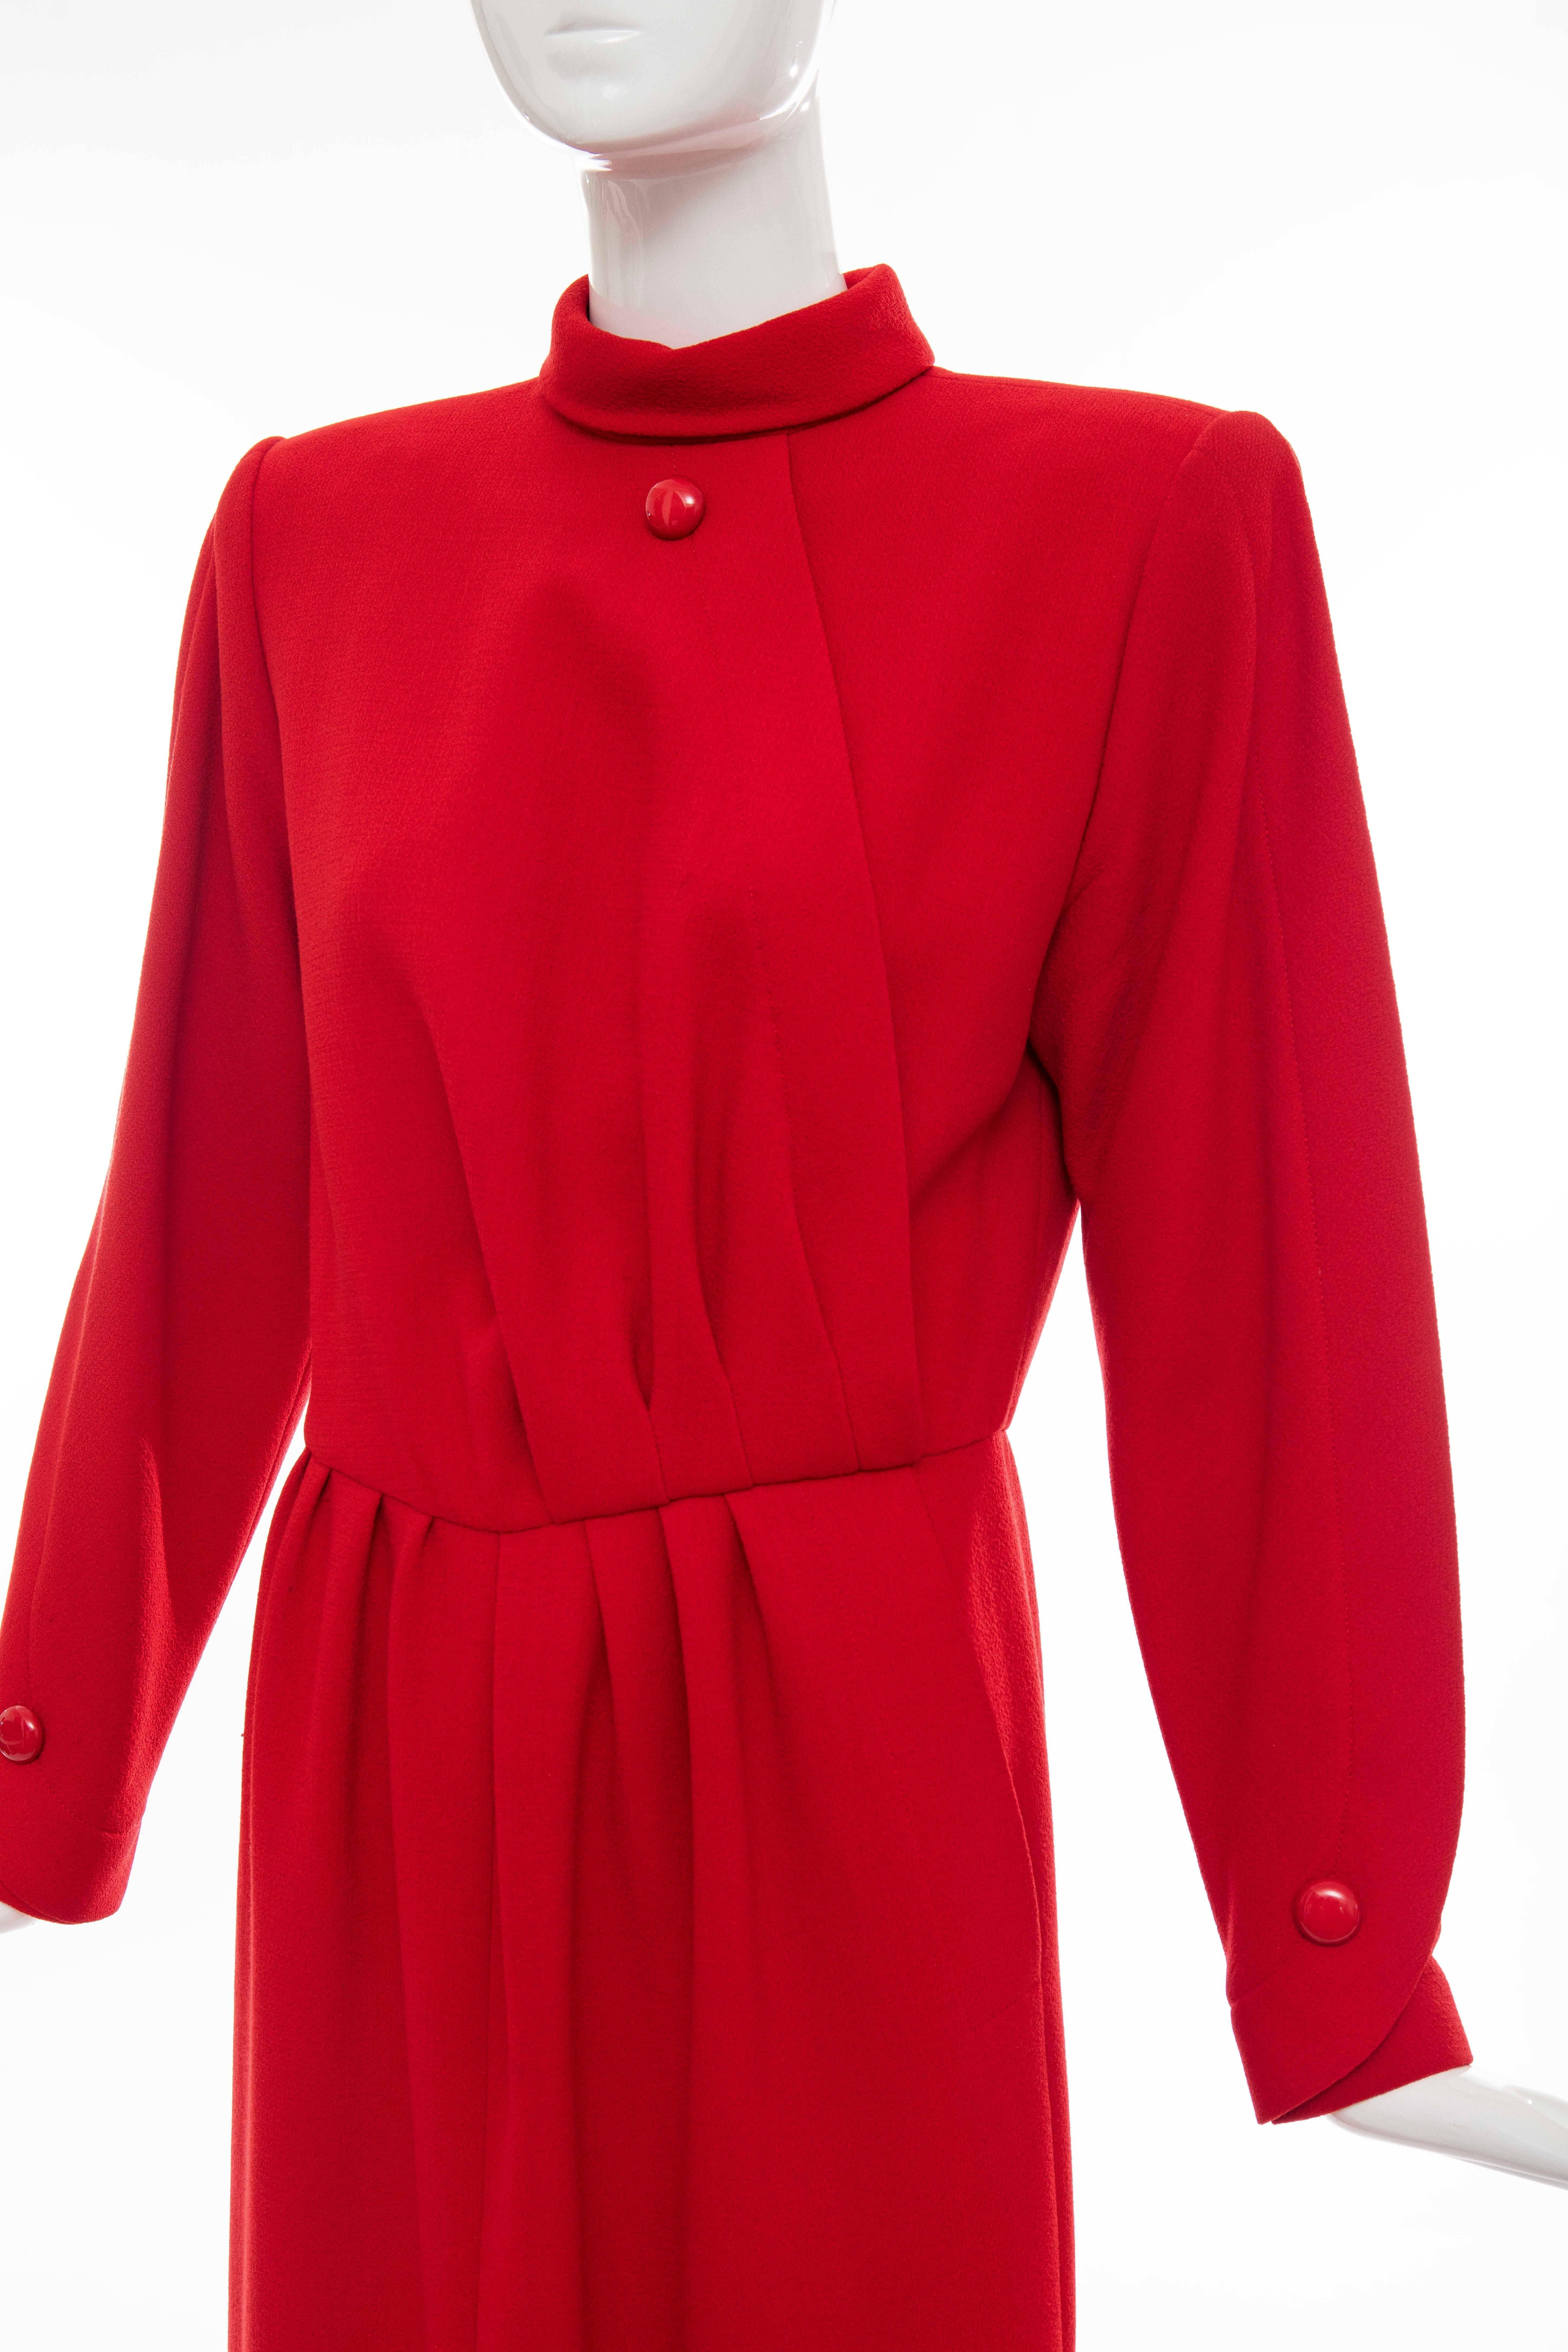 Nina Ricci Haute Couture Red Wool Crepe Dress, Circa 1980's For Sale 3